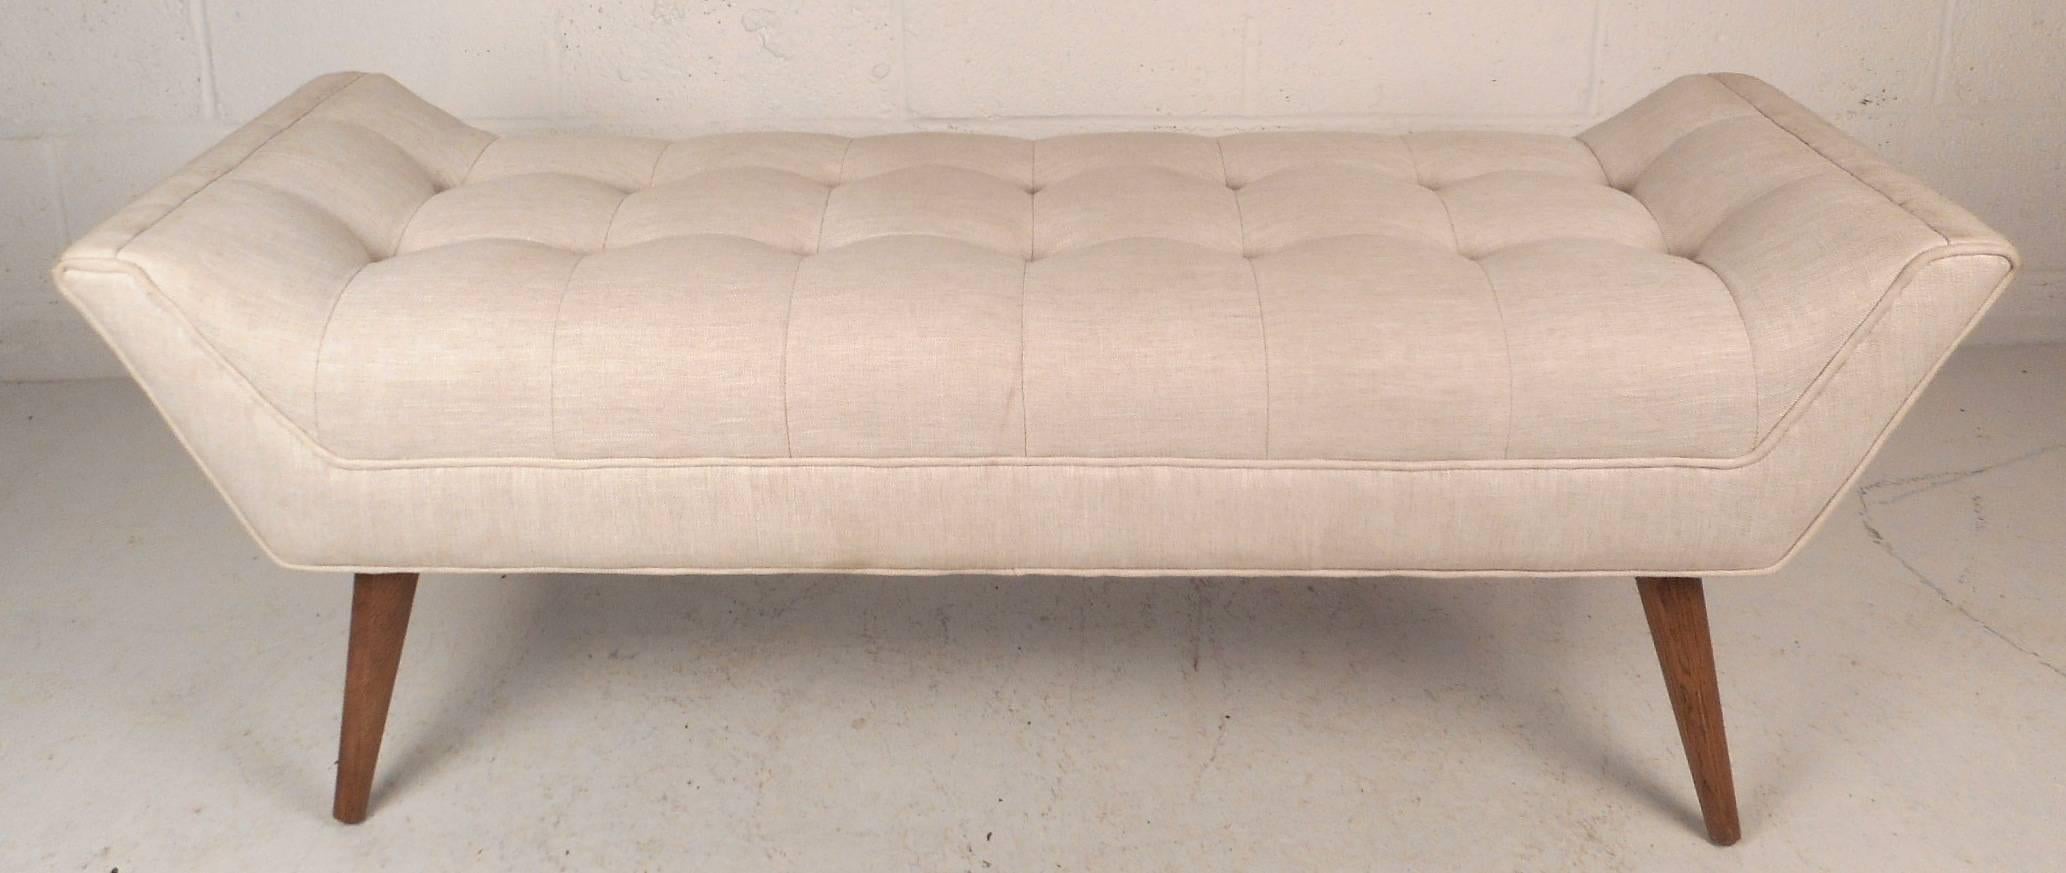 Stunning Mid-Century Modern style window bench in the style of Paul McCobb features unique tapered and splayed legs. Stylish design with plush white tufted upholstery and thick padded seating. This versatile seat can function as an ottoman or a